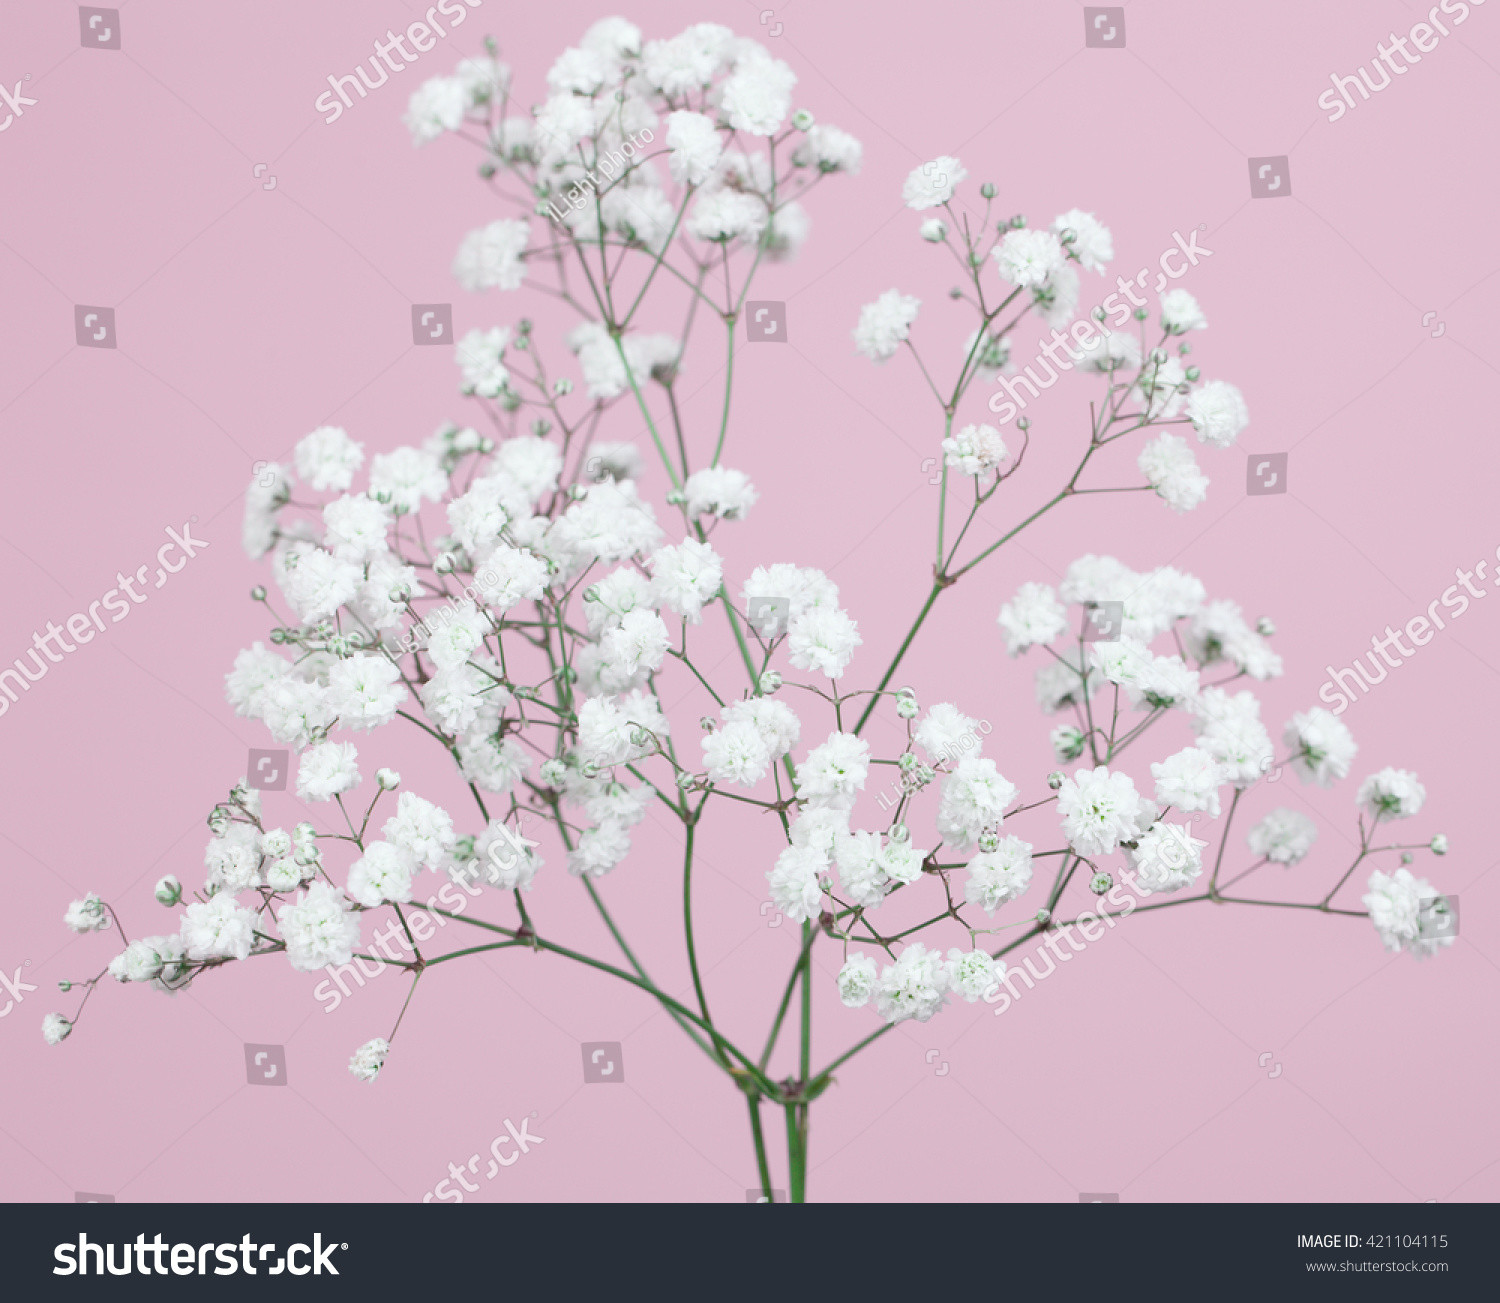 23 Stylish wholesale Vases San Diego 2024 free download wholesale vases san diego of bunch od babys breath flowers on a light pink background ez canvas throughout id 421104115